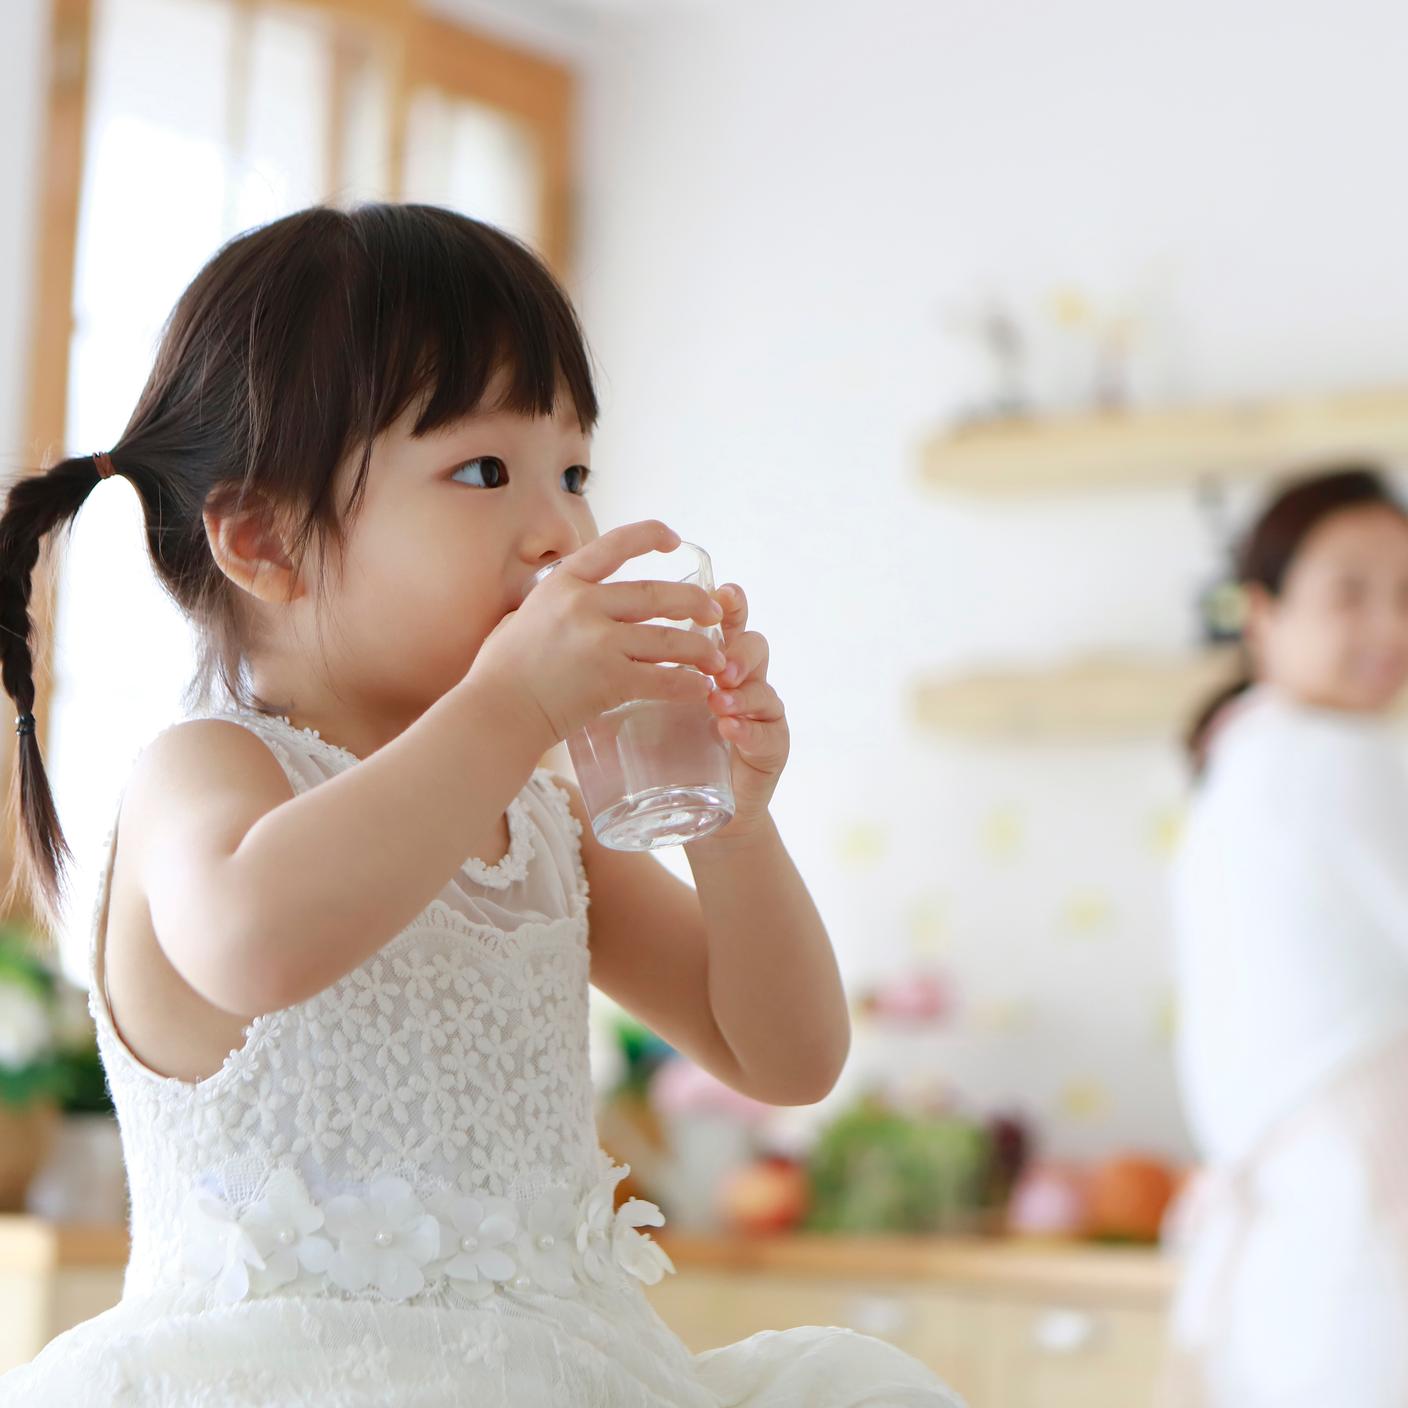 Little girl drinking glass of water in kitchen